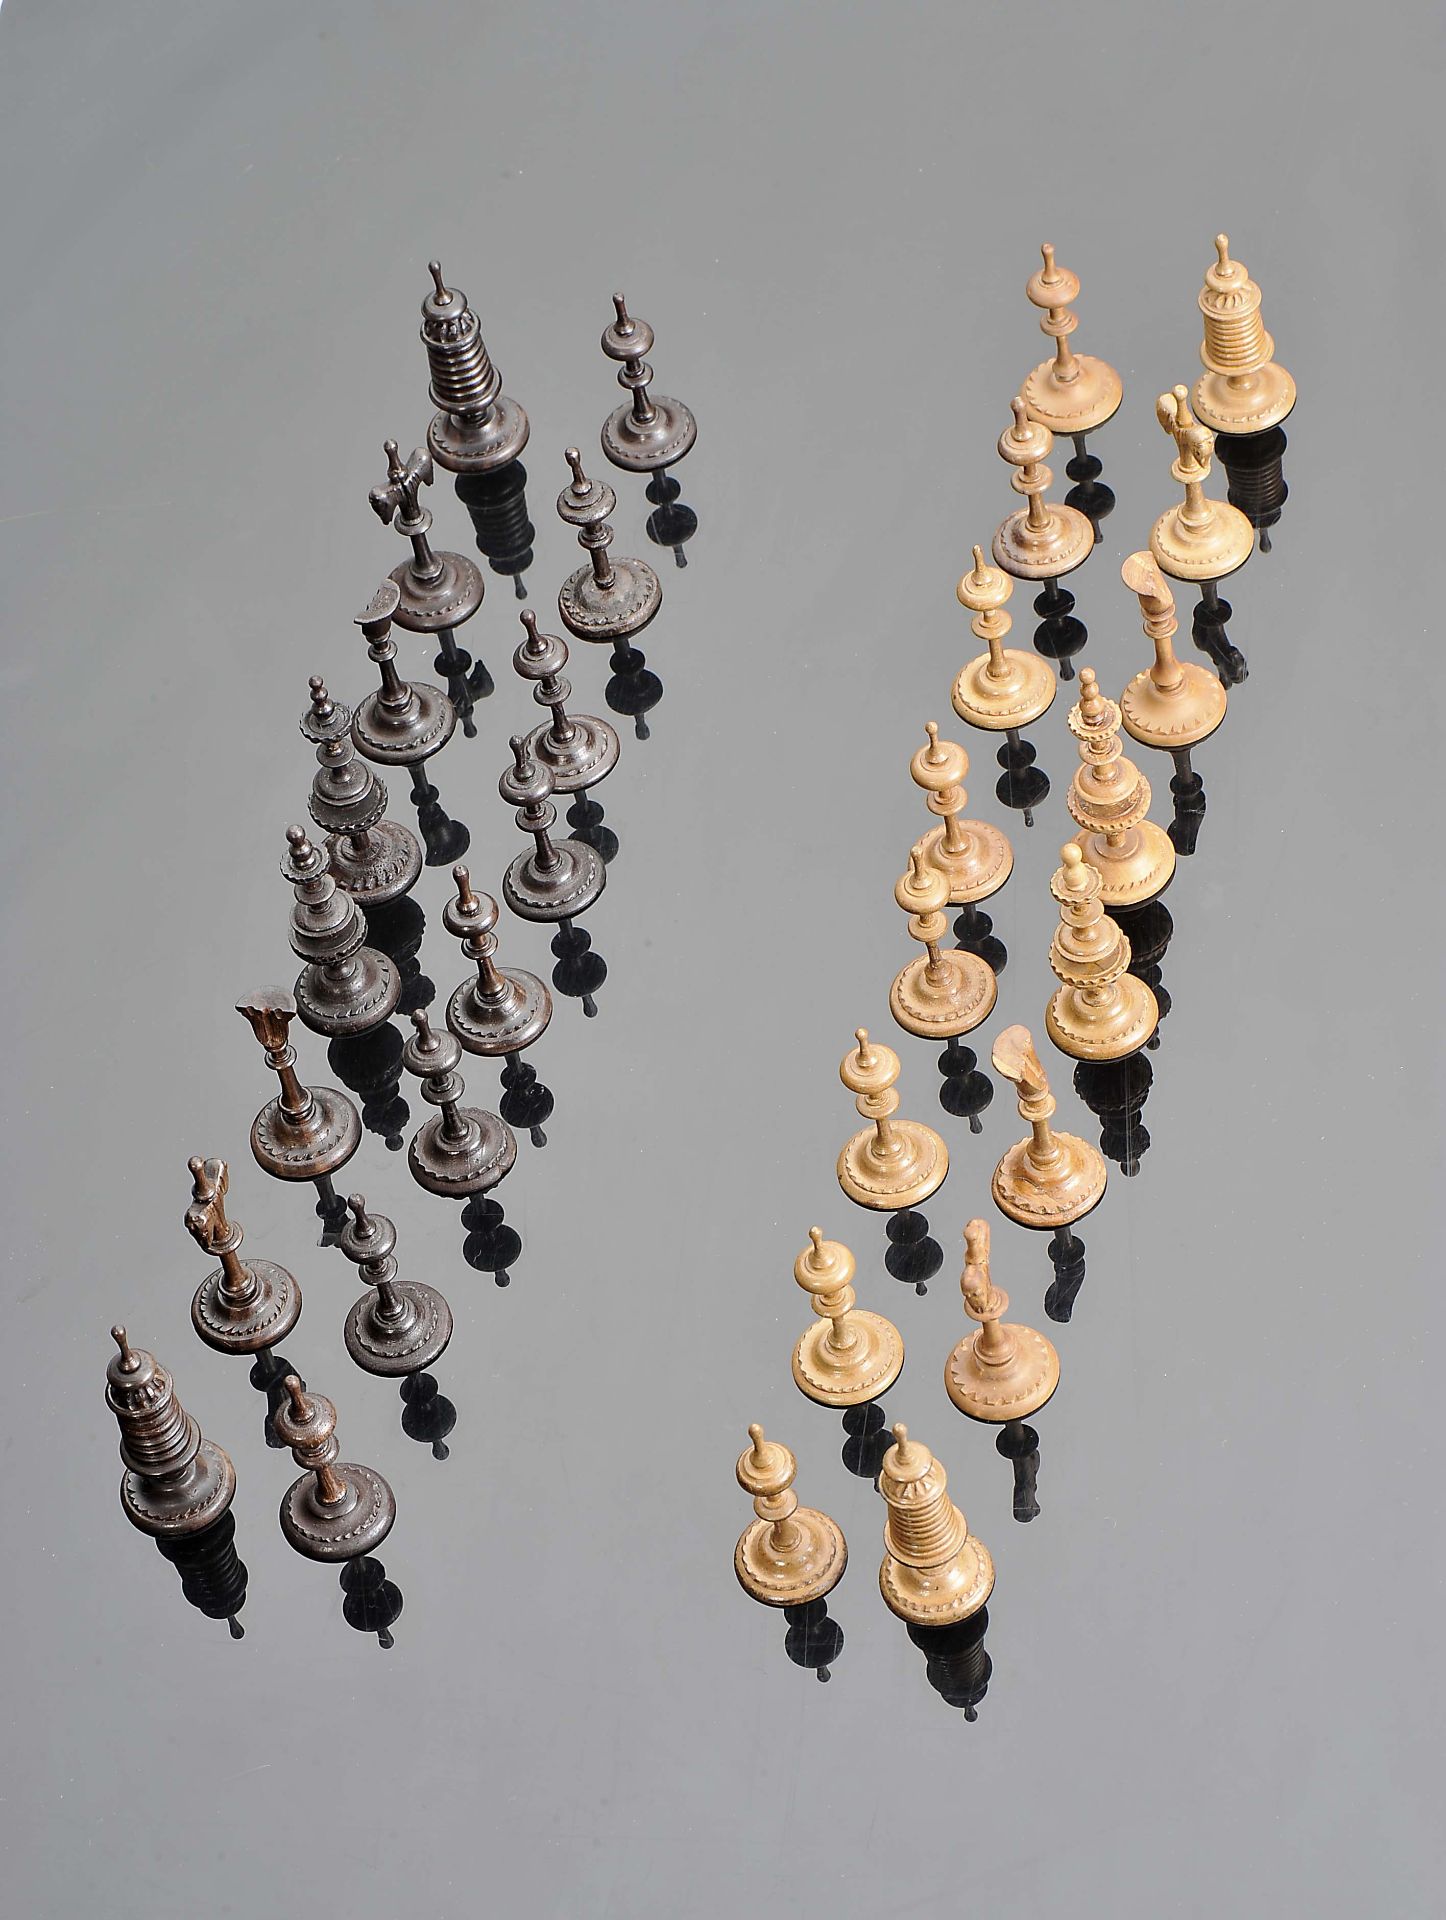 A "Selenus" chess pieces